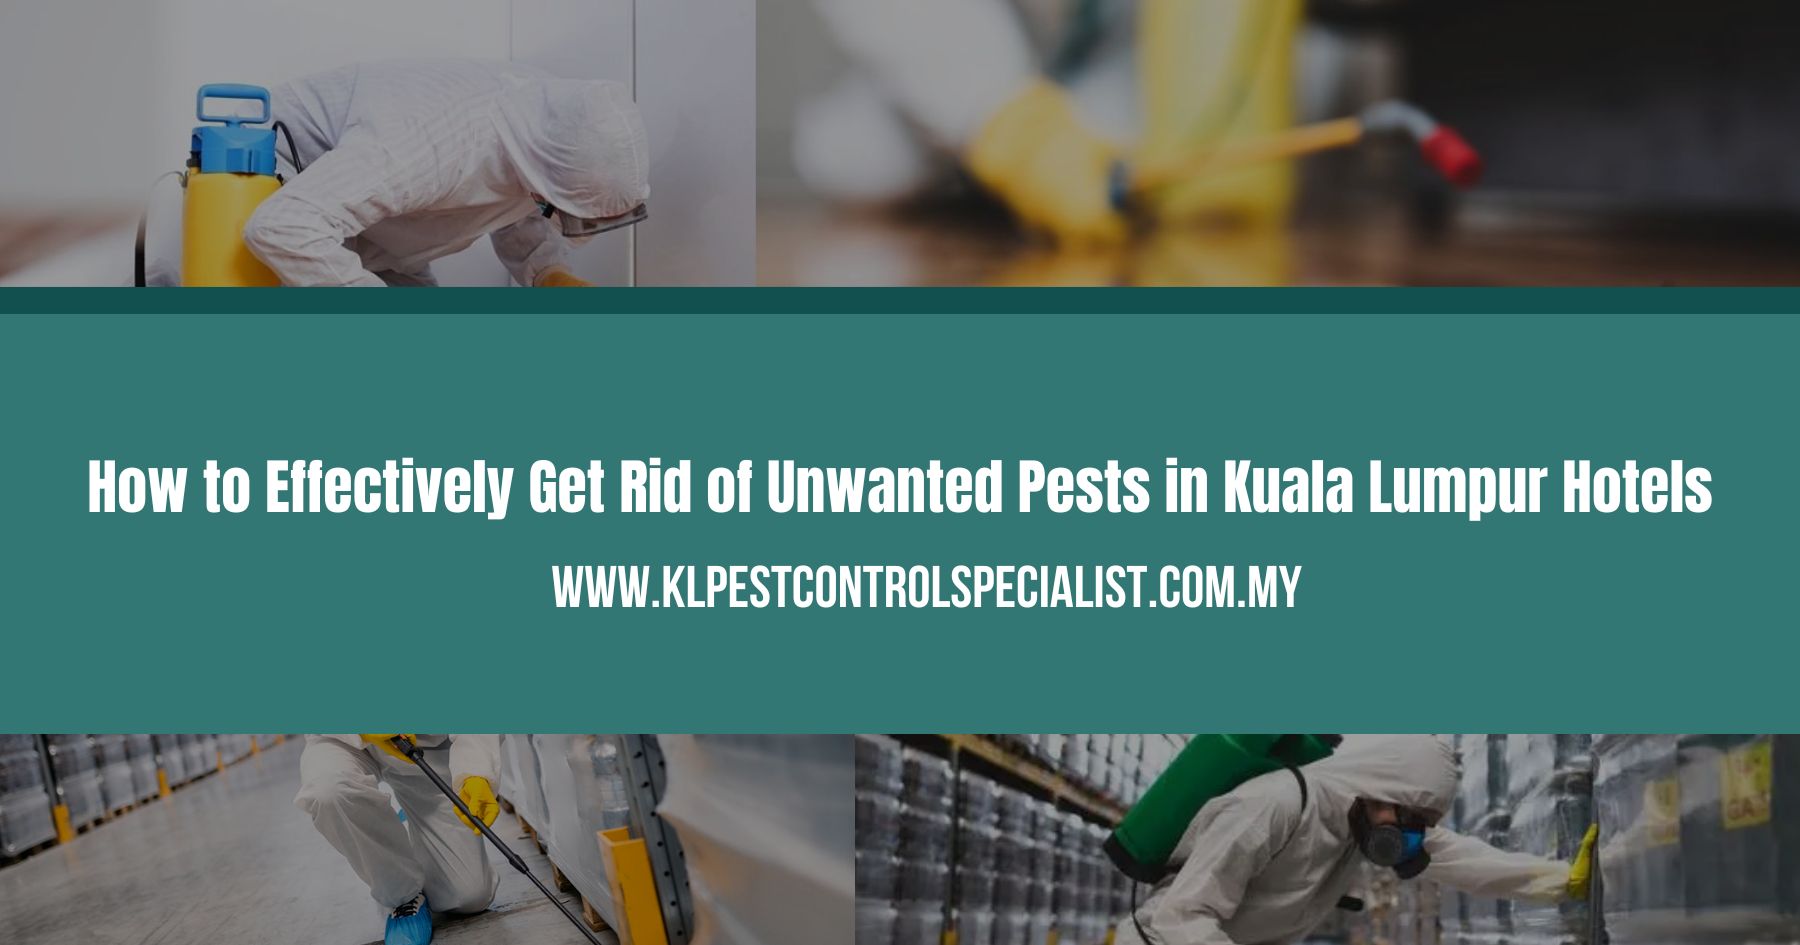 How to Effectively Get Rid of Unwanted Pests in Kuala Lumpur Hotels